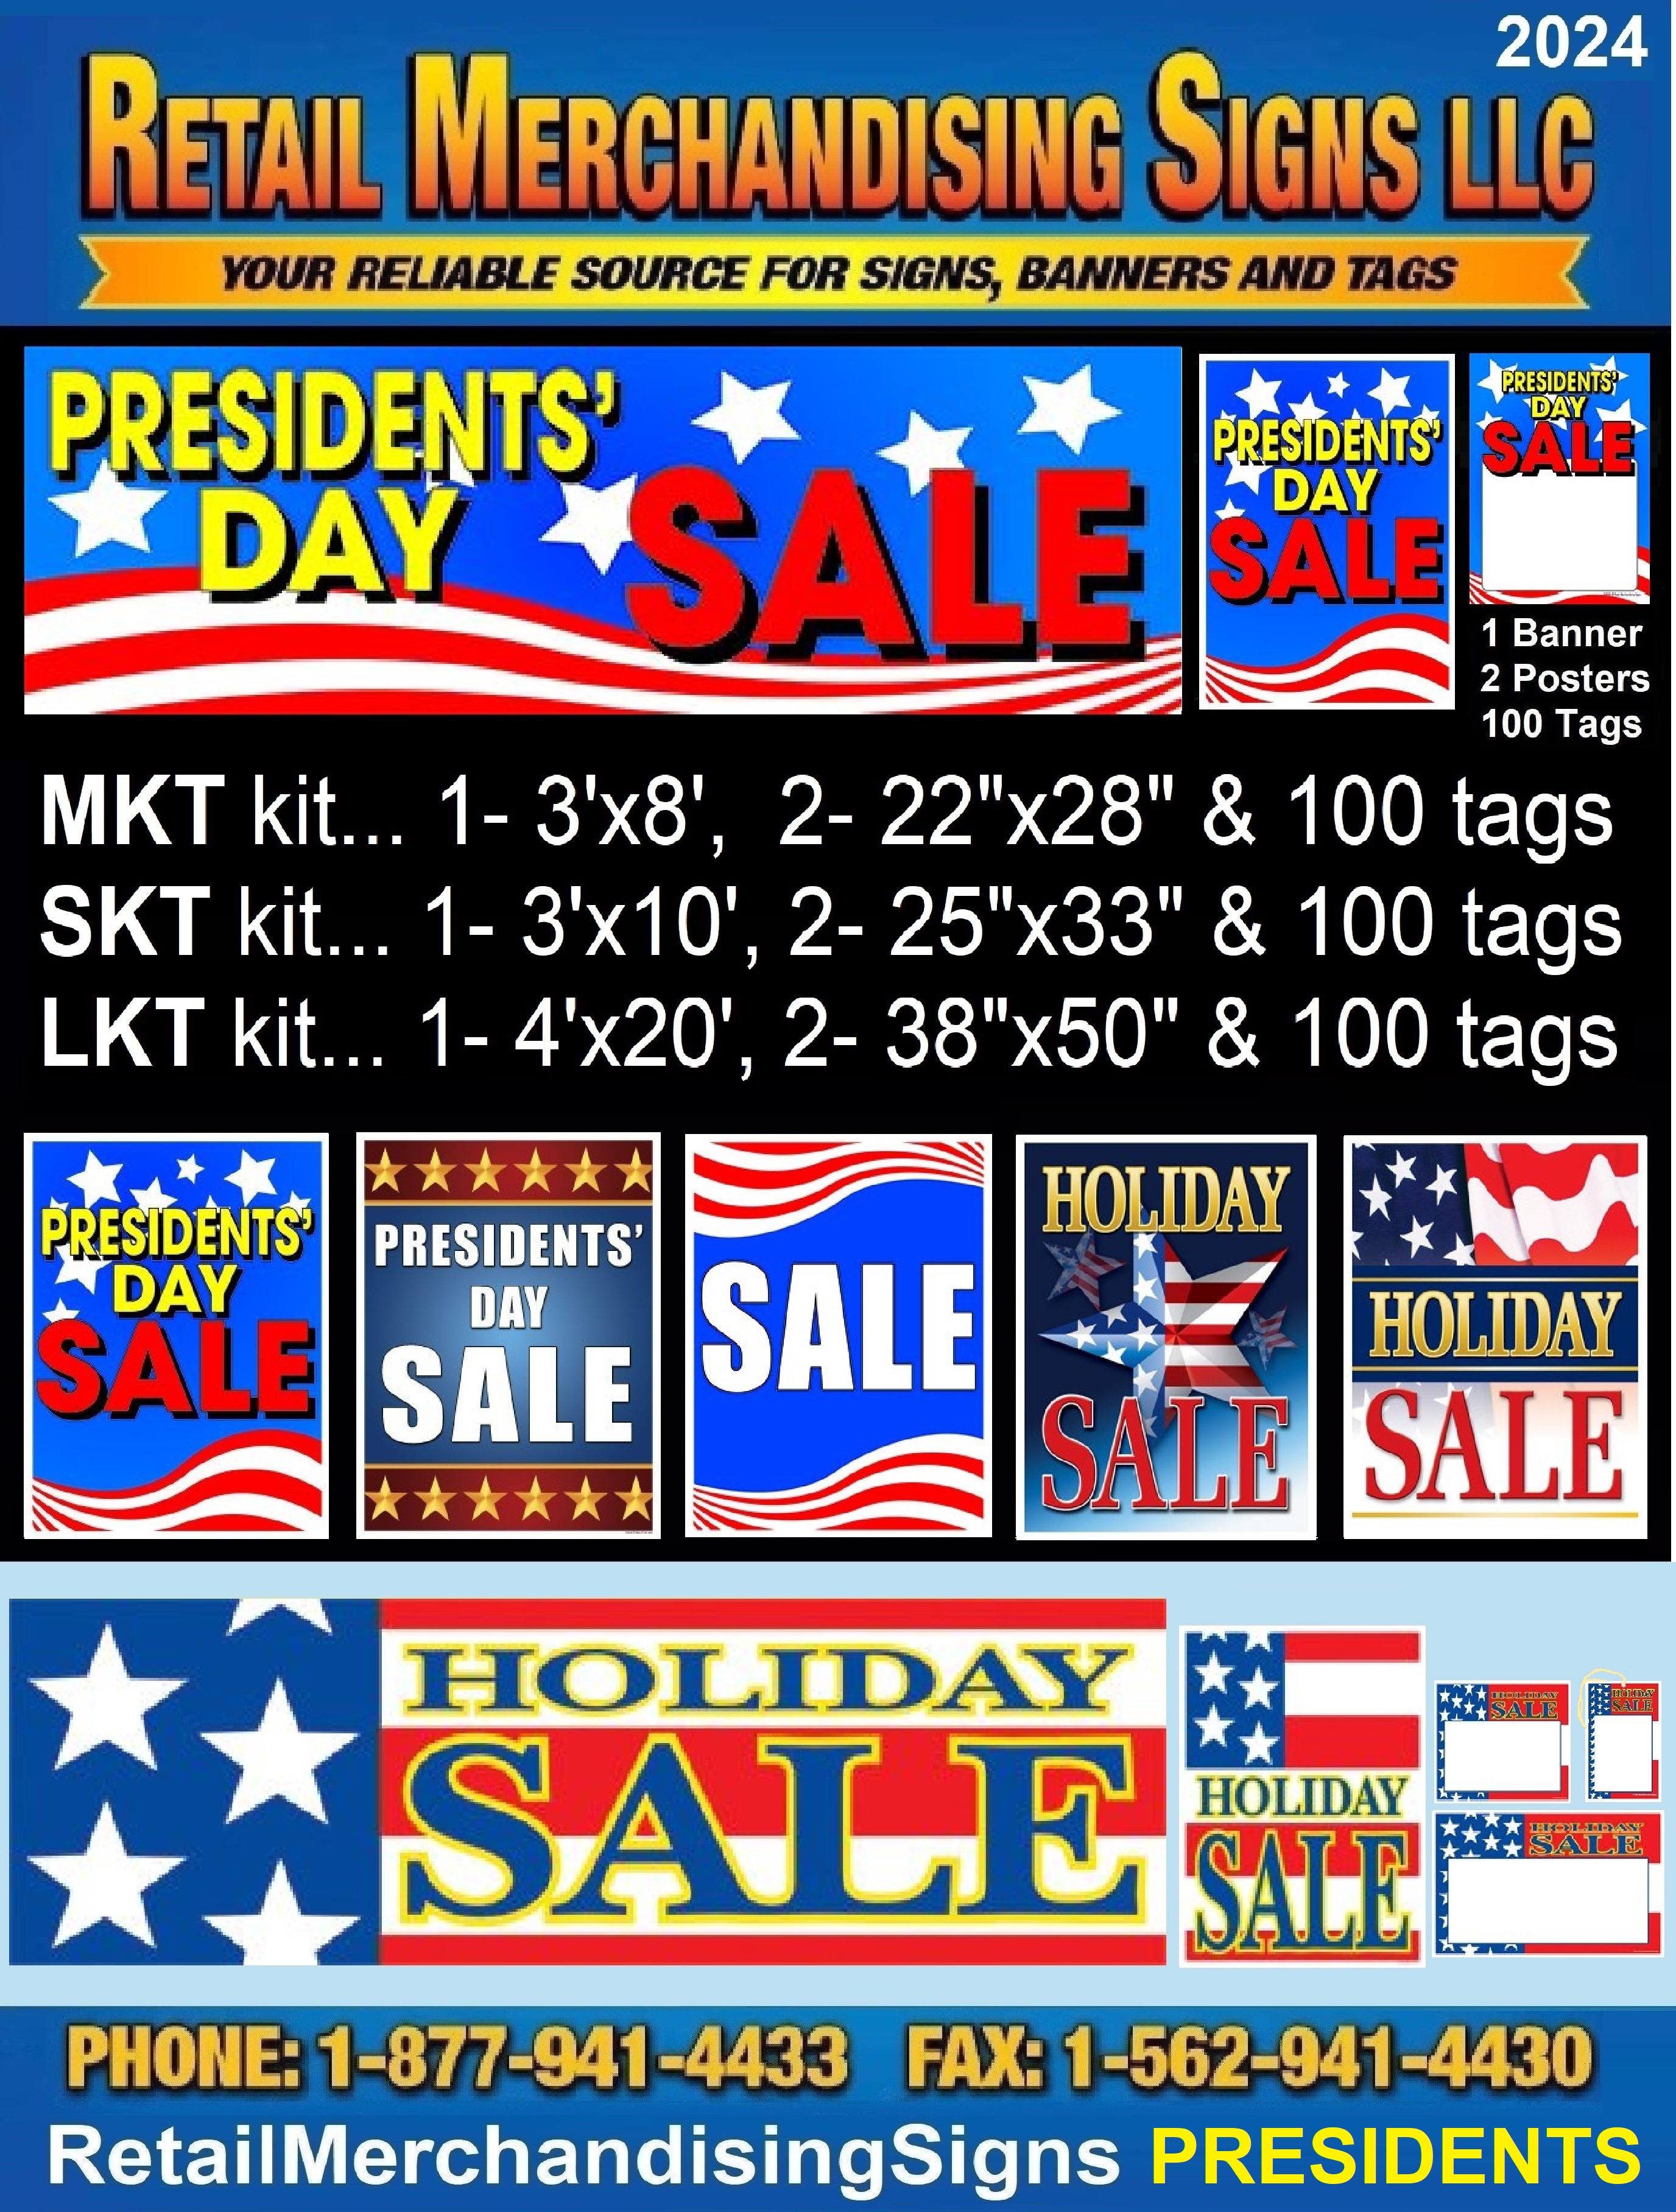 https://www.retailmerchandisingsigns.com/images/PRESIDENTS_DAY_SALE_SAVINGS_CARDS_TAGS_POSTERS_BANNERS_KITS.jpg